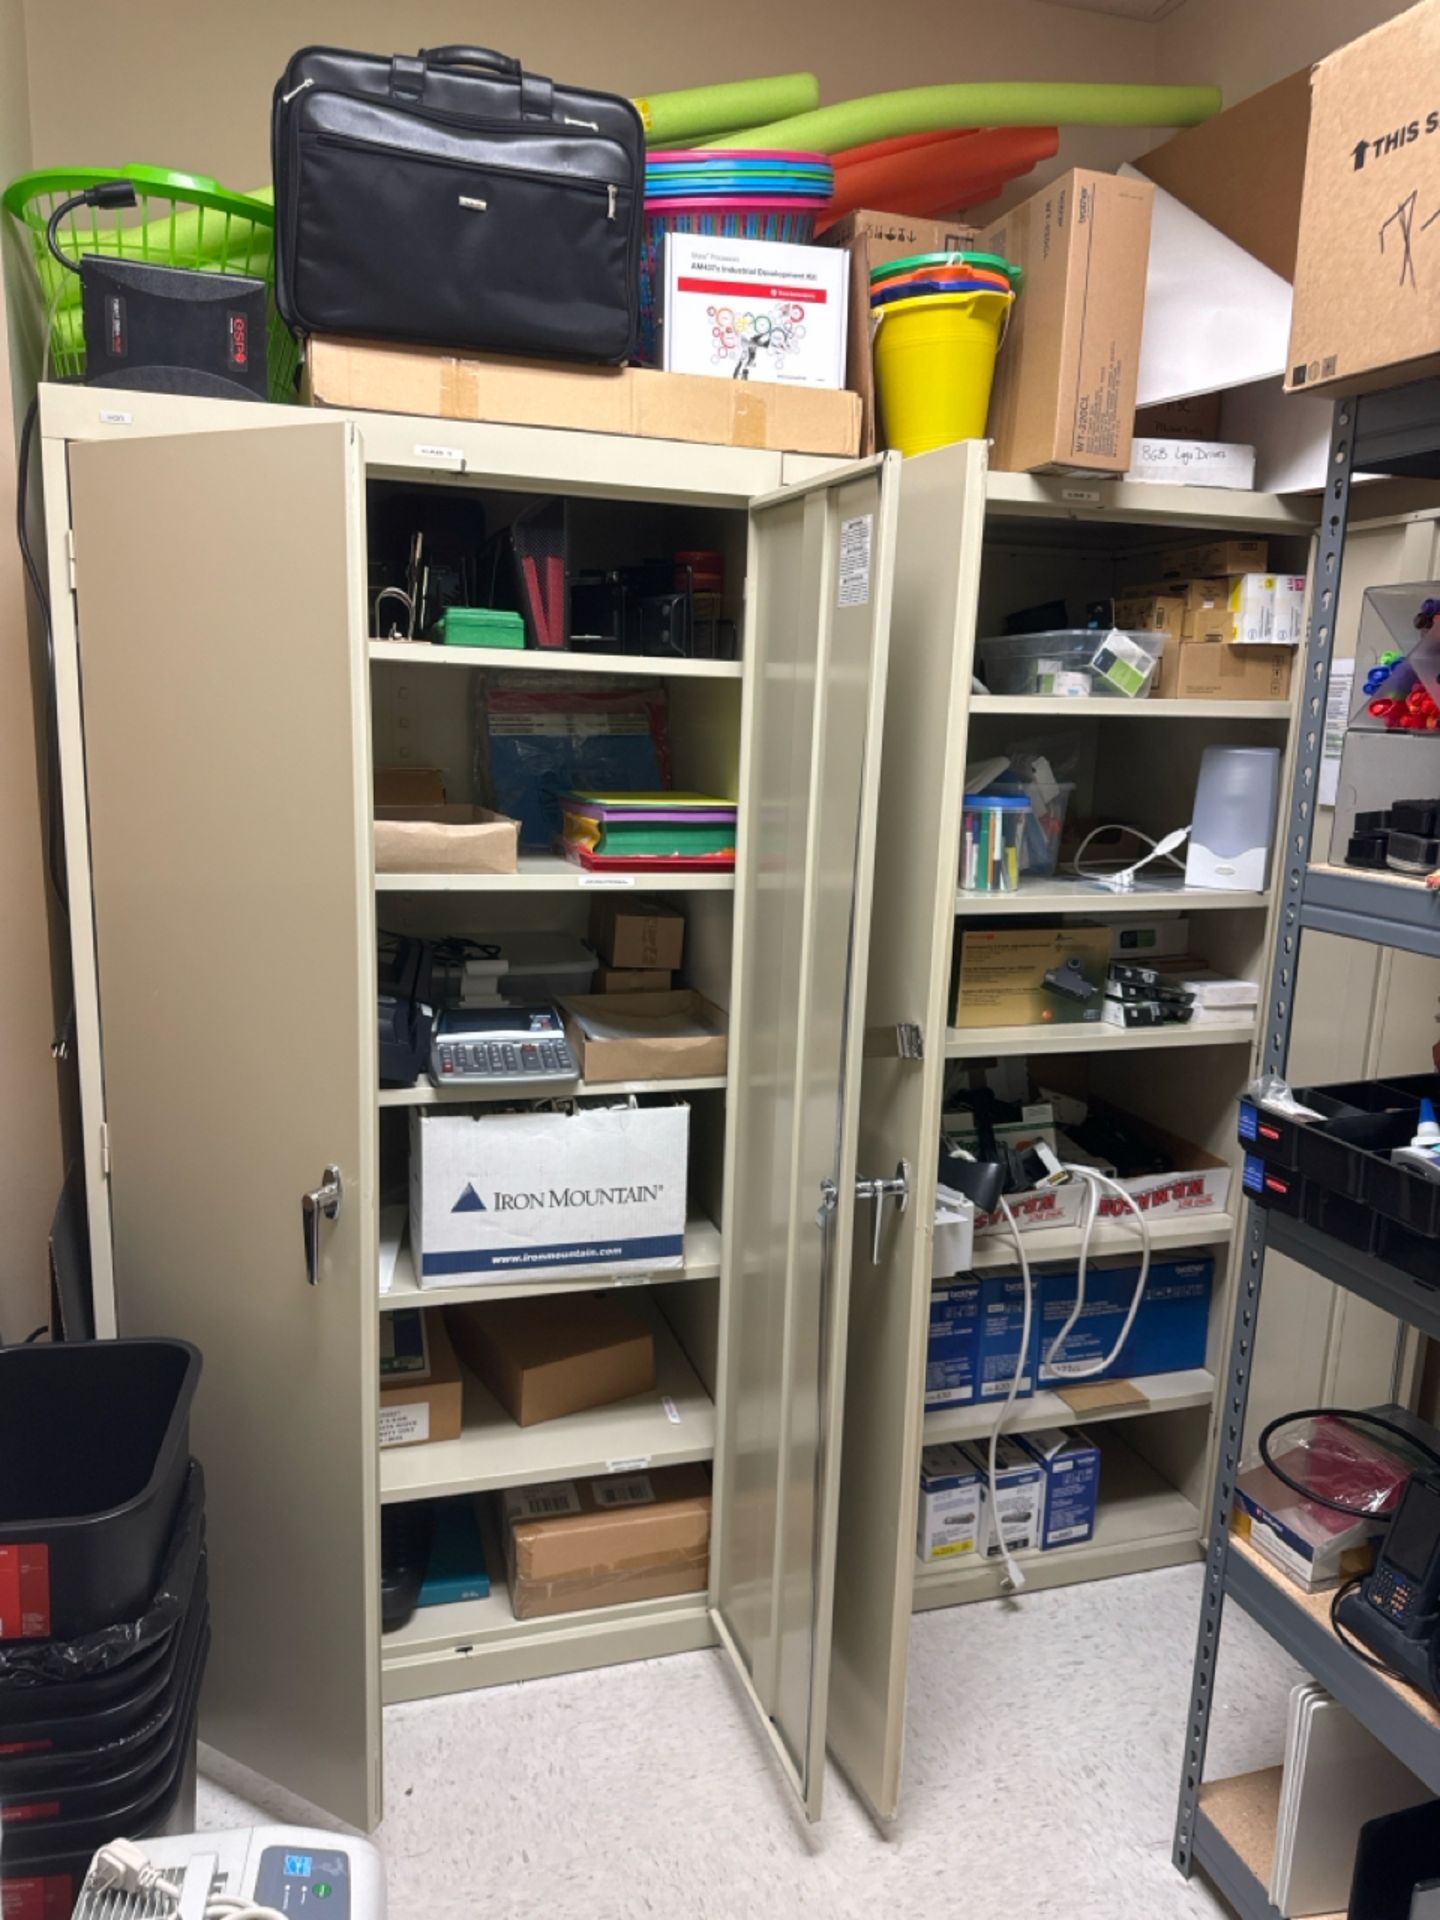 Contents Of Storage Room - Image 14 of 19